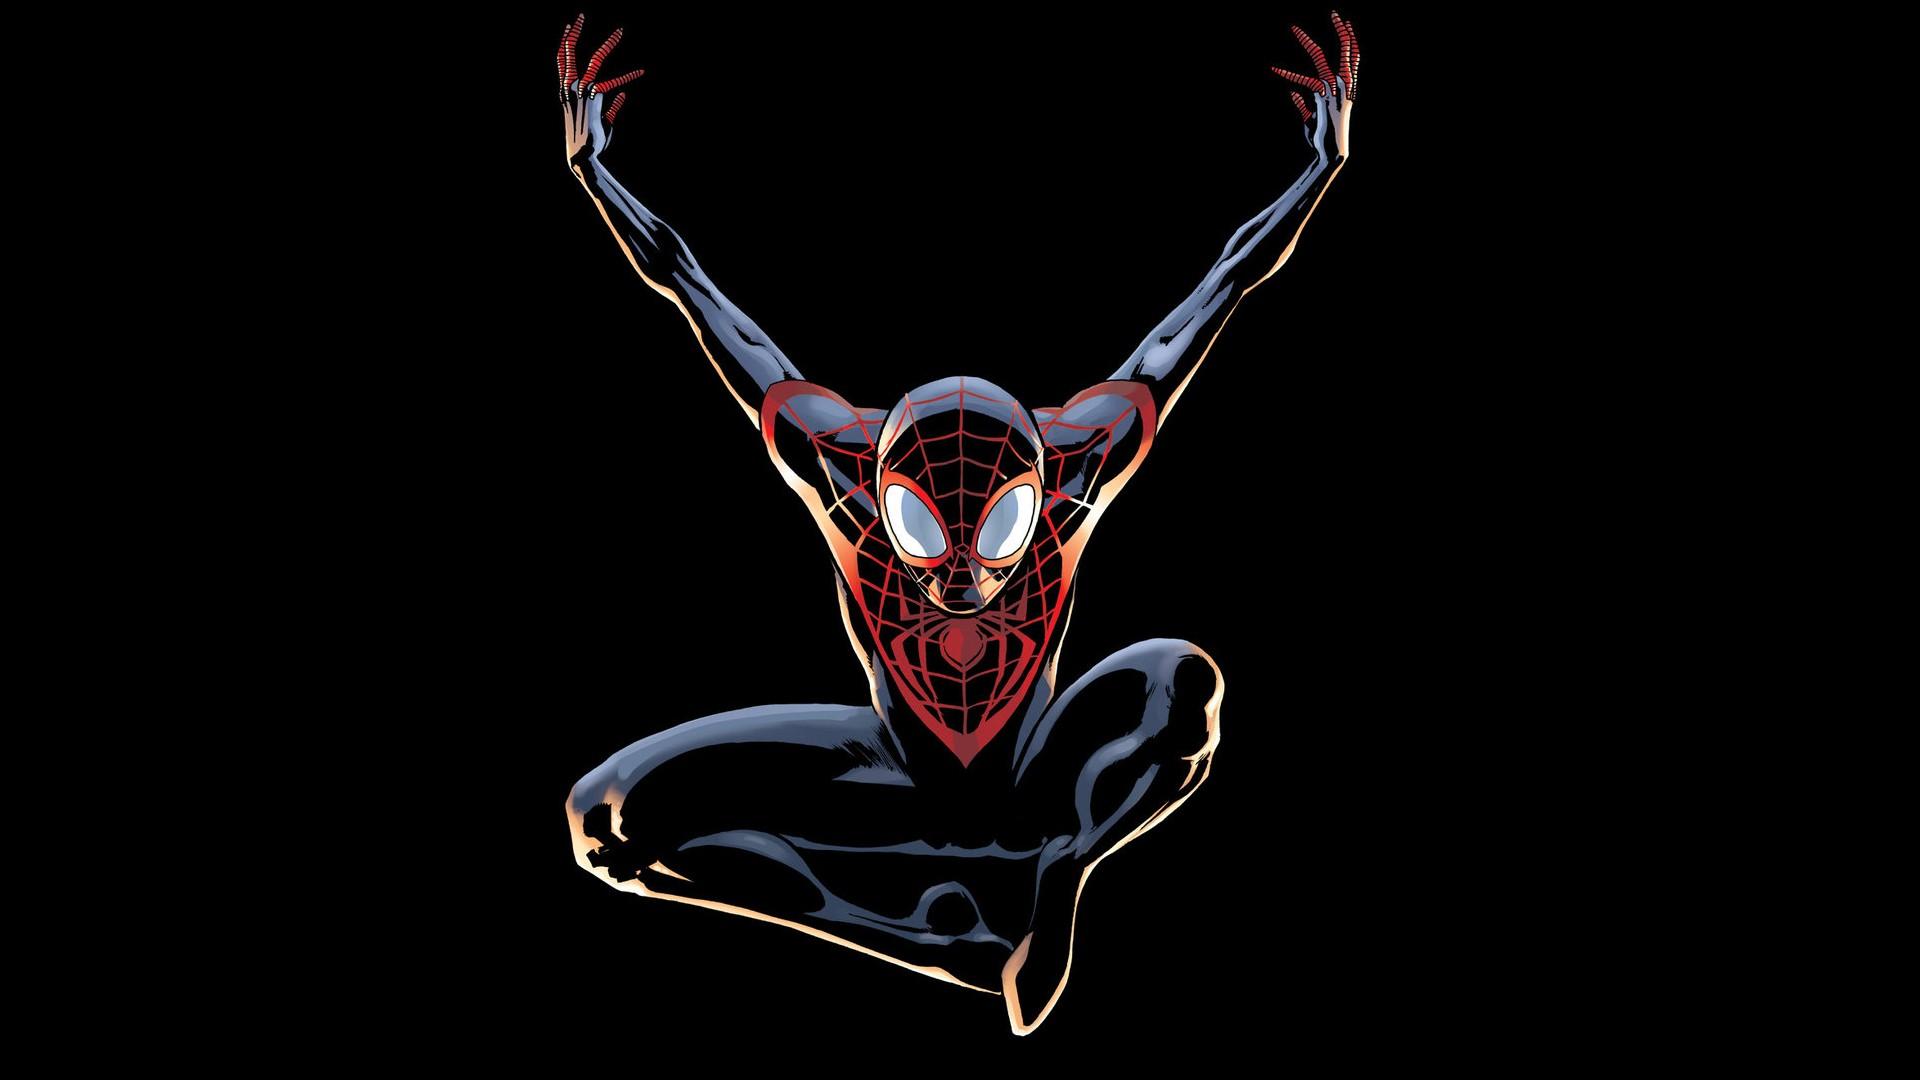 Anime Spider Man Wallpapers Wallpaper Cave